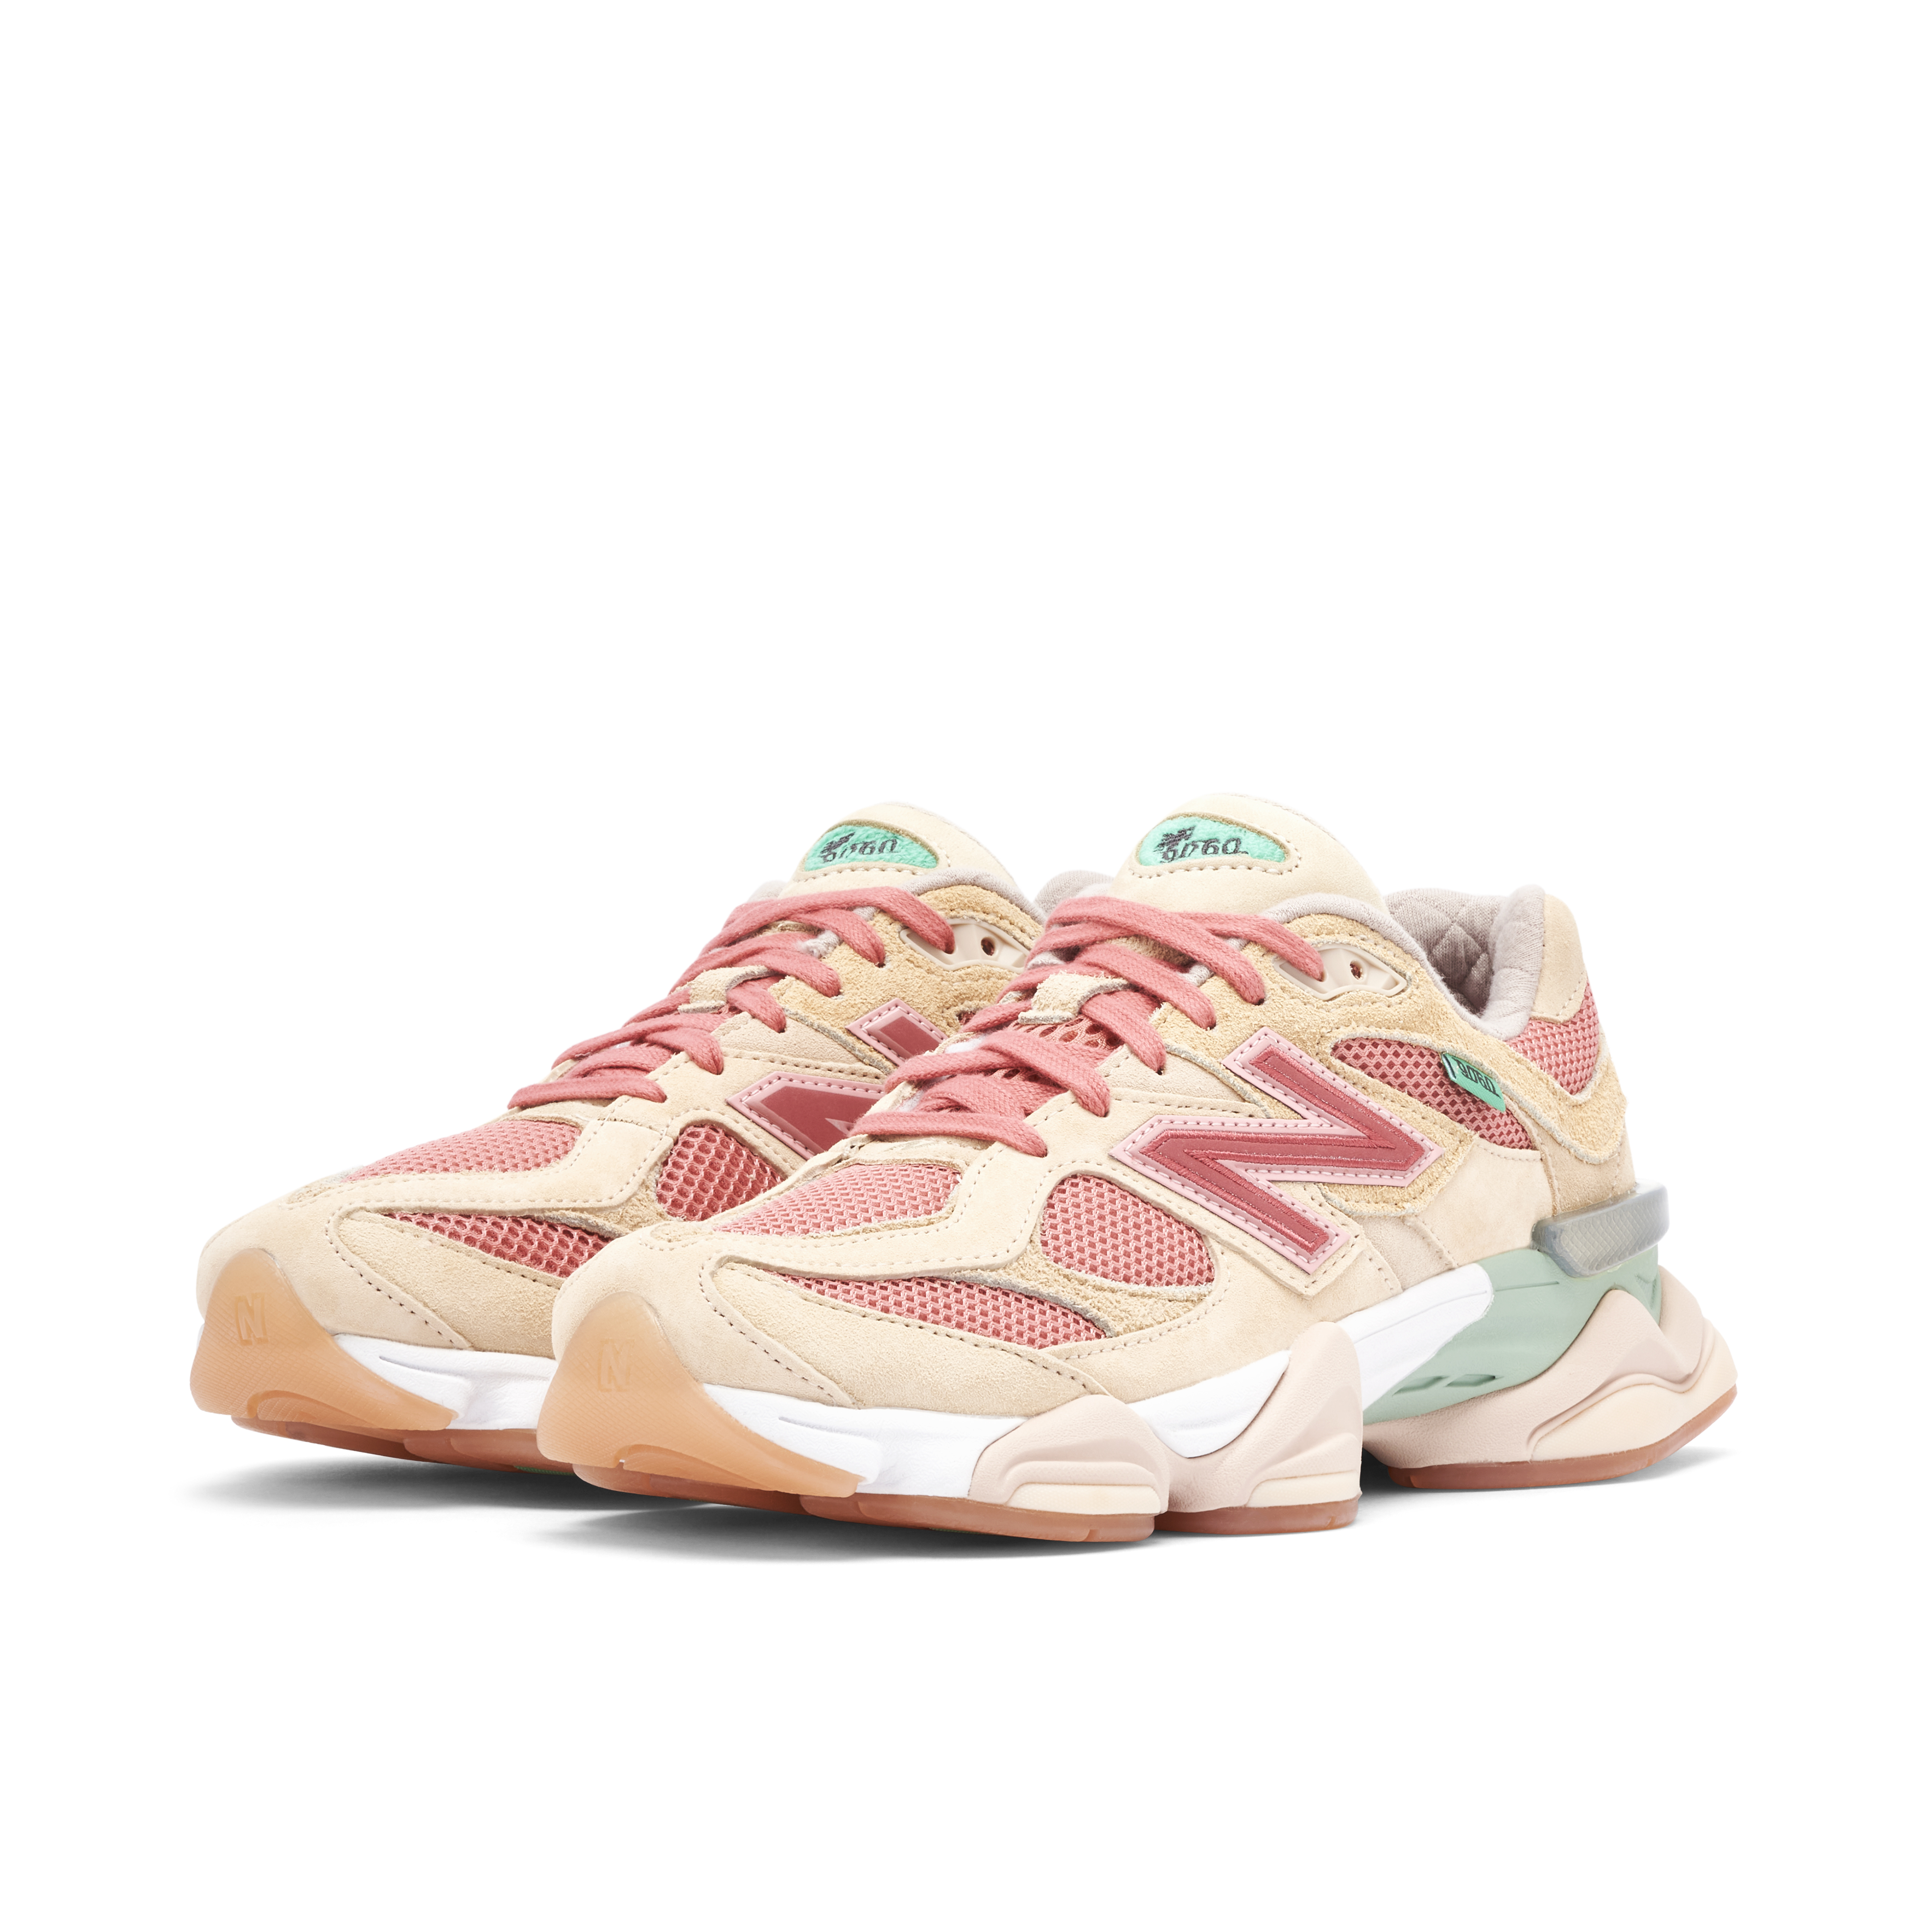 New Balance 9060 x Joe Freshgoods Inside Voices Penny Cookie Pink